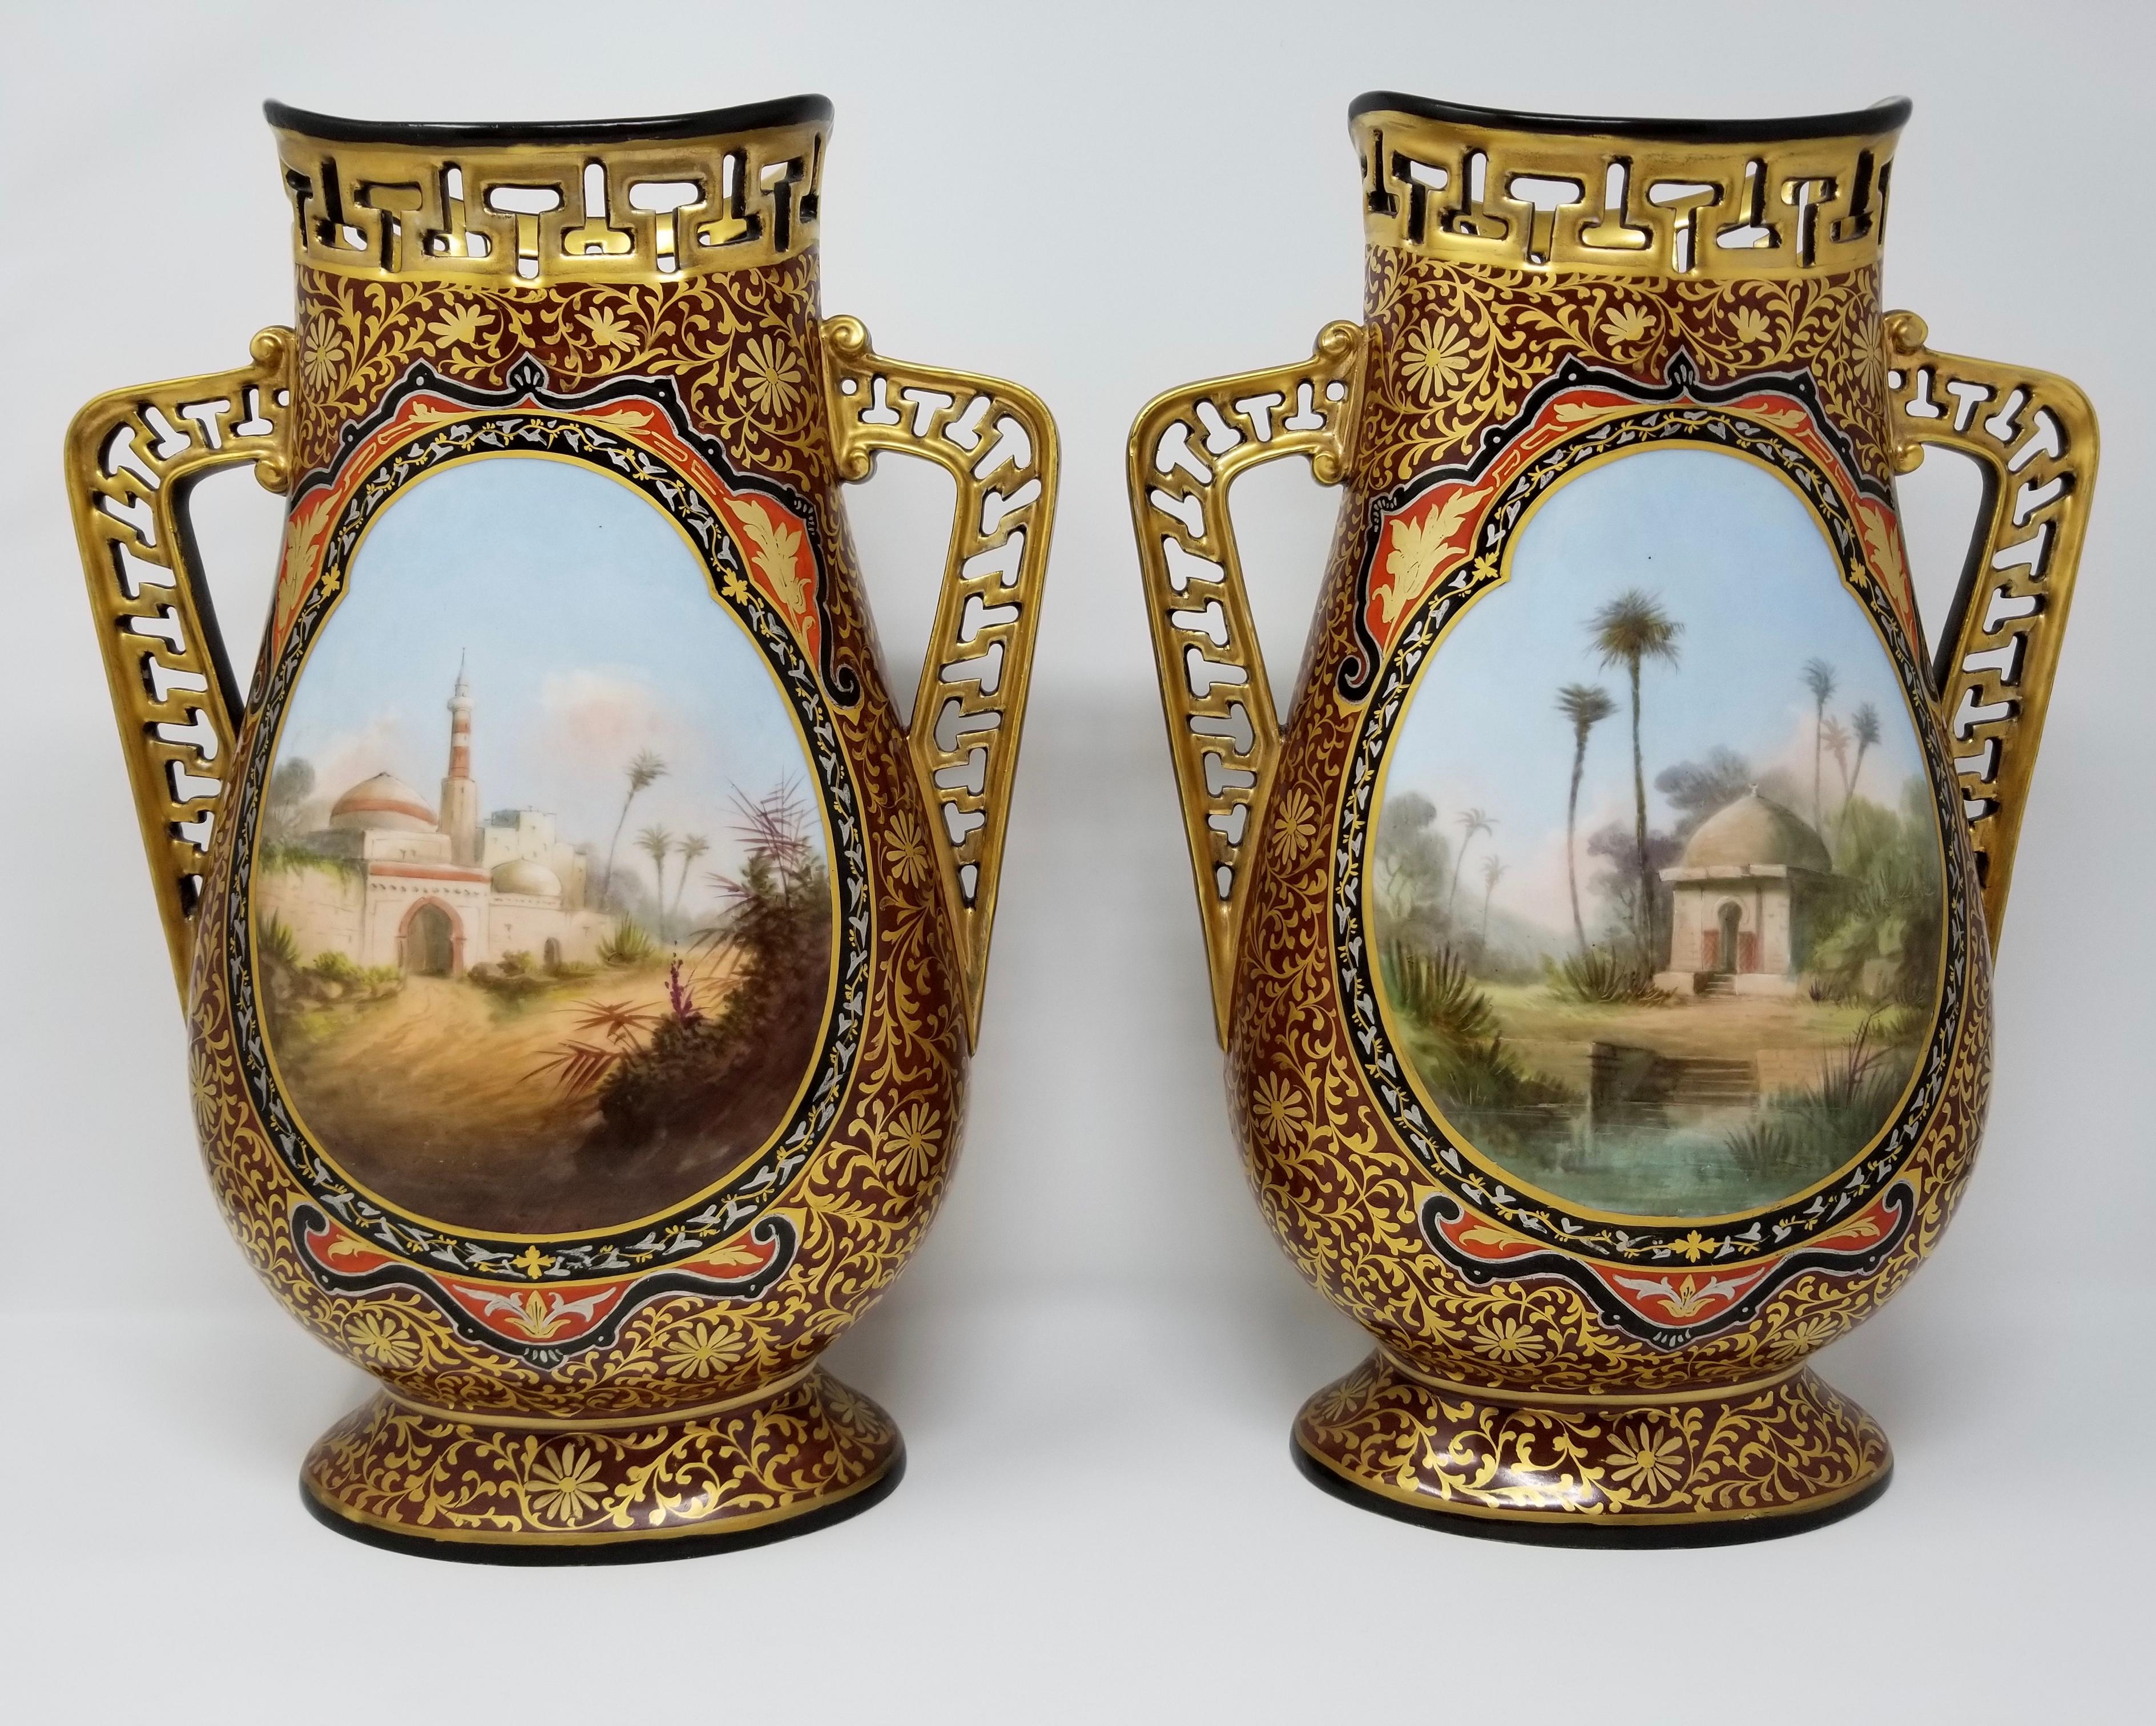 A beautiful pair of 19th century French porcelain vases depicting Orientalist Royal painted figures/Maidens standing in the Palace and reverse-painted with castle scenes, made for the Islamic/Turkish Market. Each maiden is beautifully hand painted